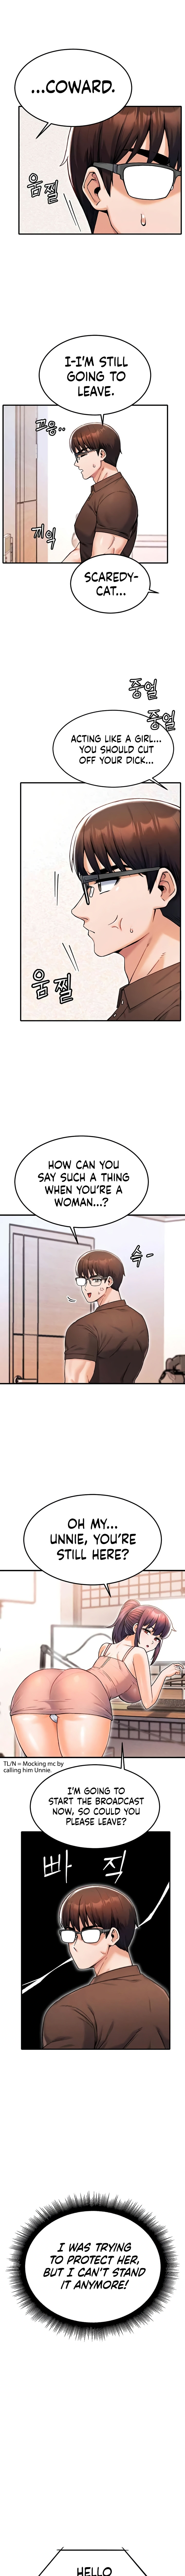 Kangcheol’s Bosses - Chapter 12 Page 11